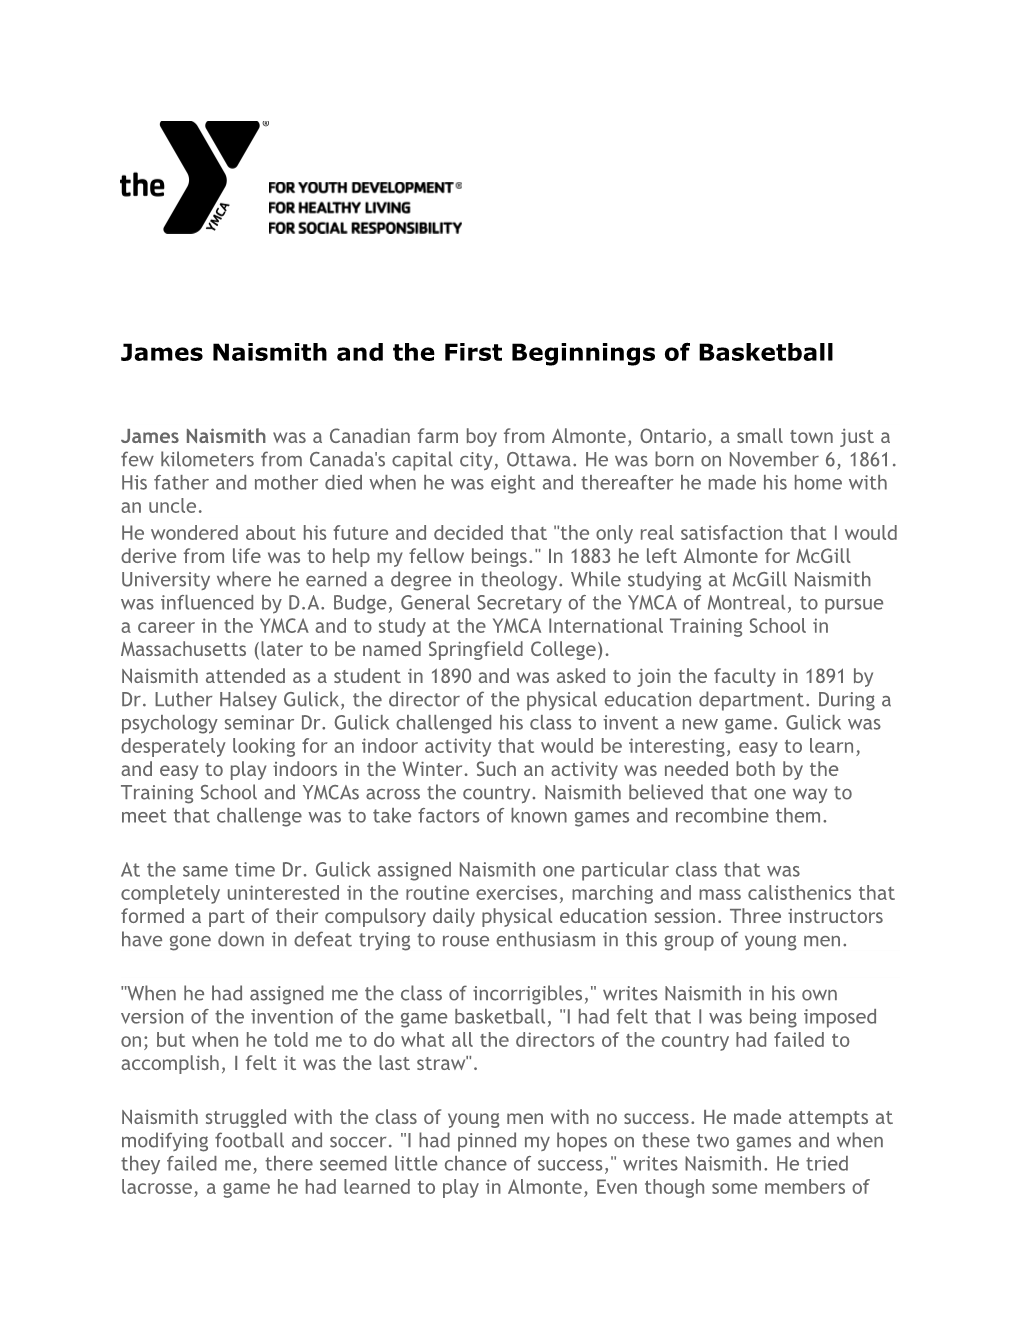 James Naismith and the First Beginnings of Basketball